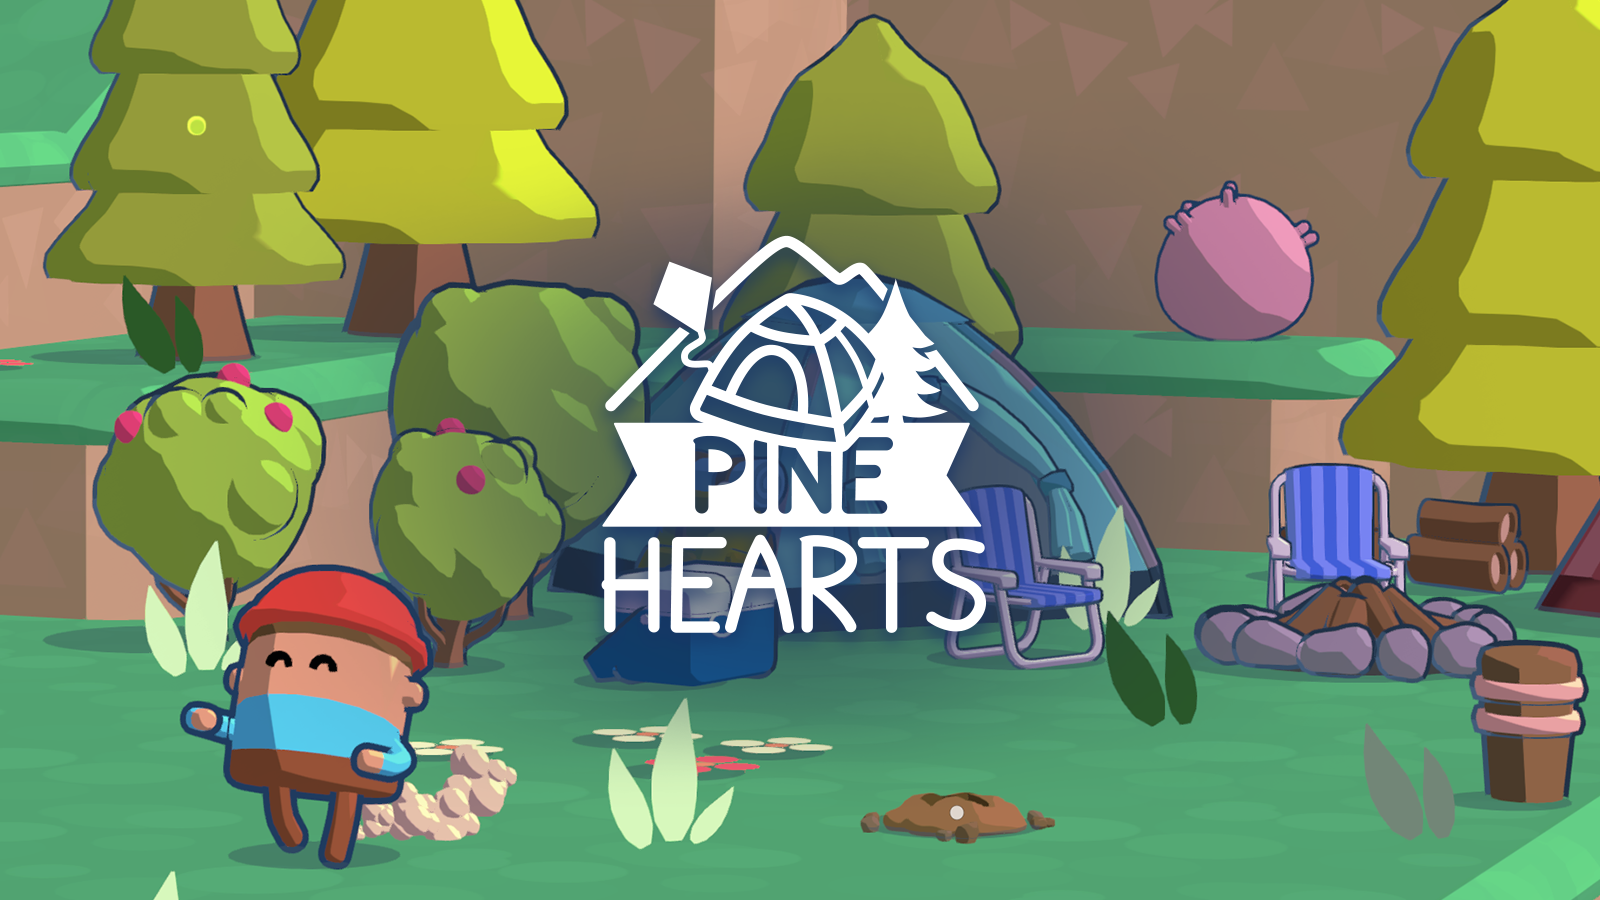 Pine Hearts cover art. A hiker runs through a lush green campsite. The style is cutesy and polygonal.